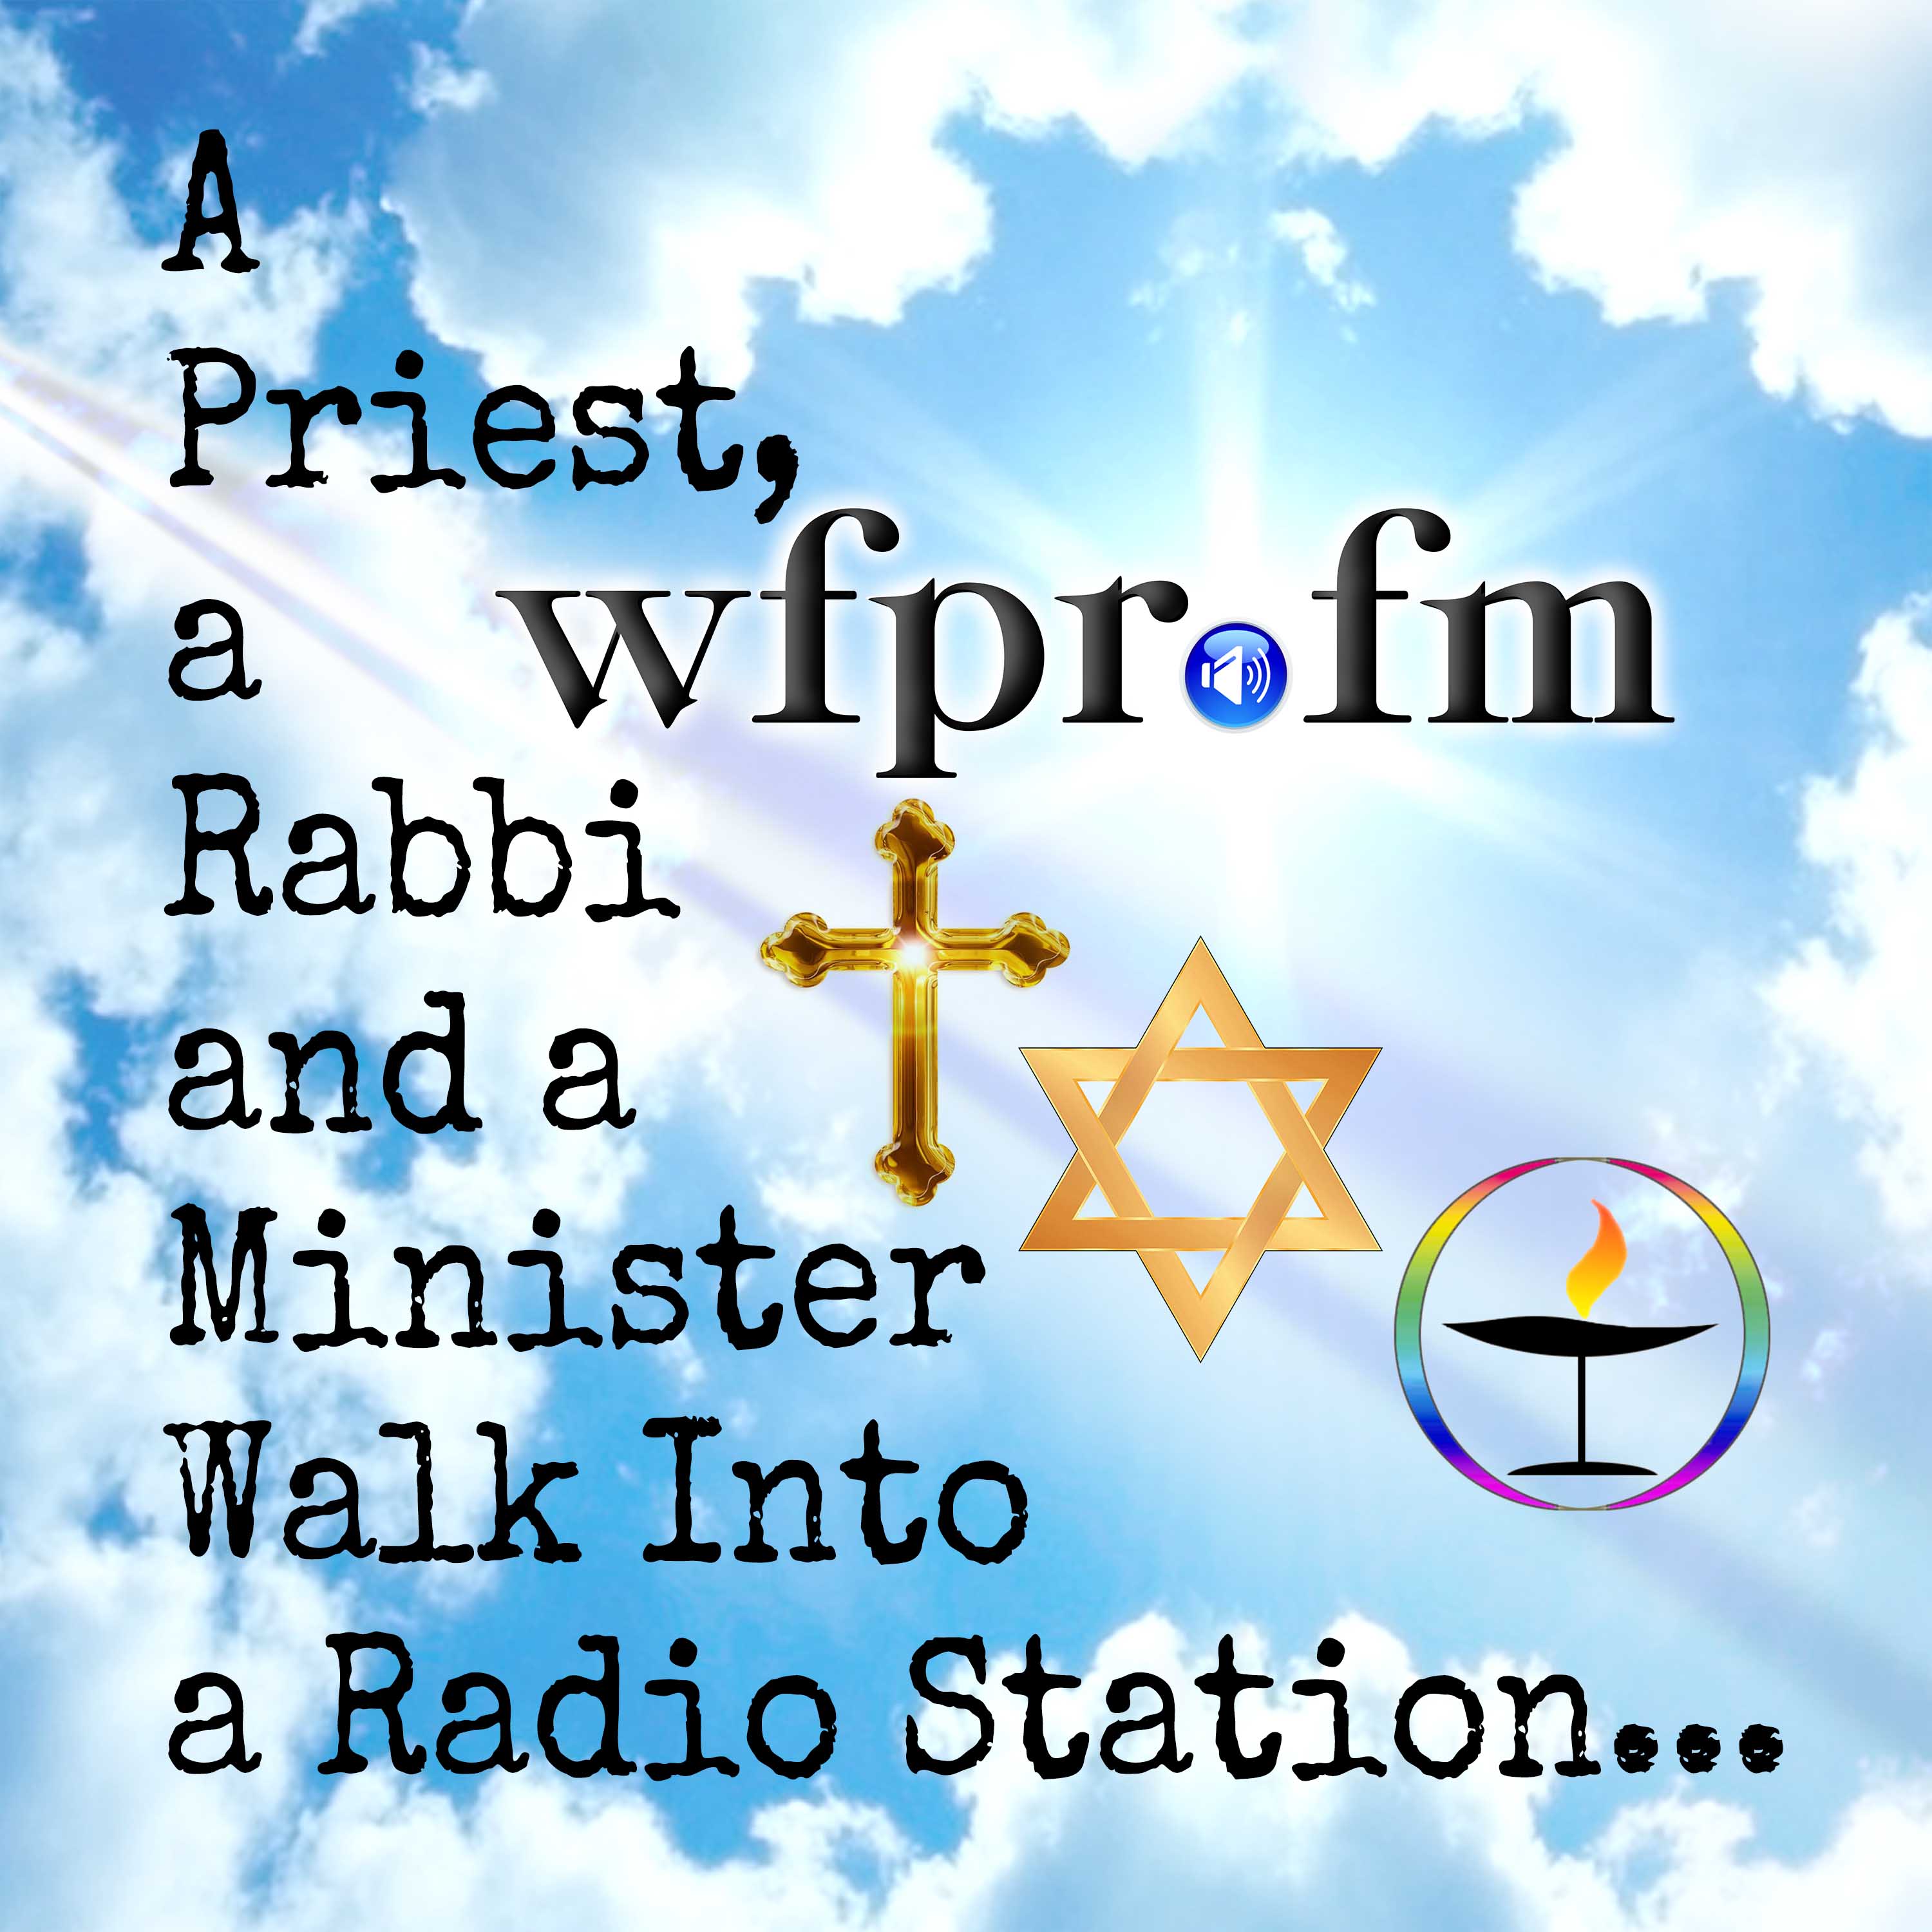 Artwork for podcast A Priest A Rabbi and A Minister Walk Into A Radio Station - WFPR